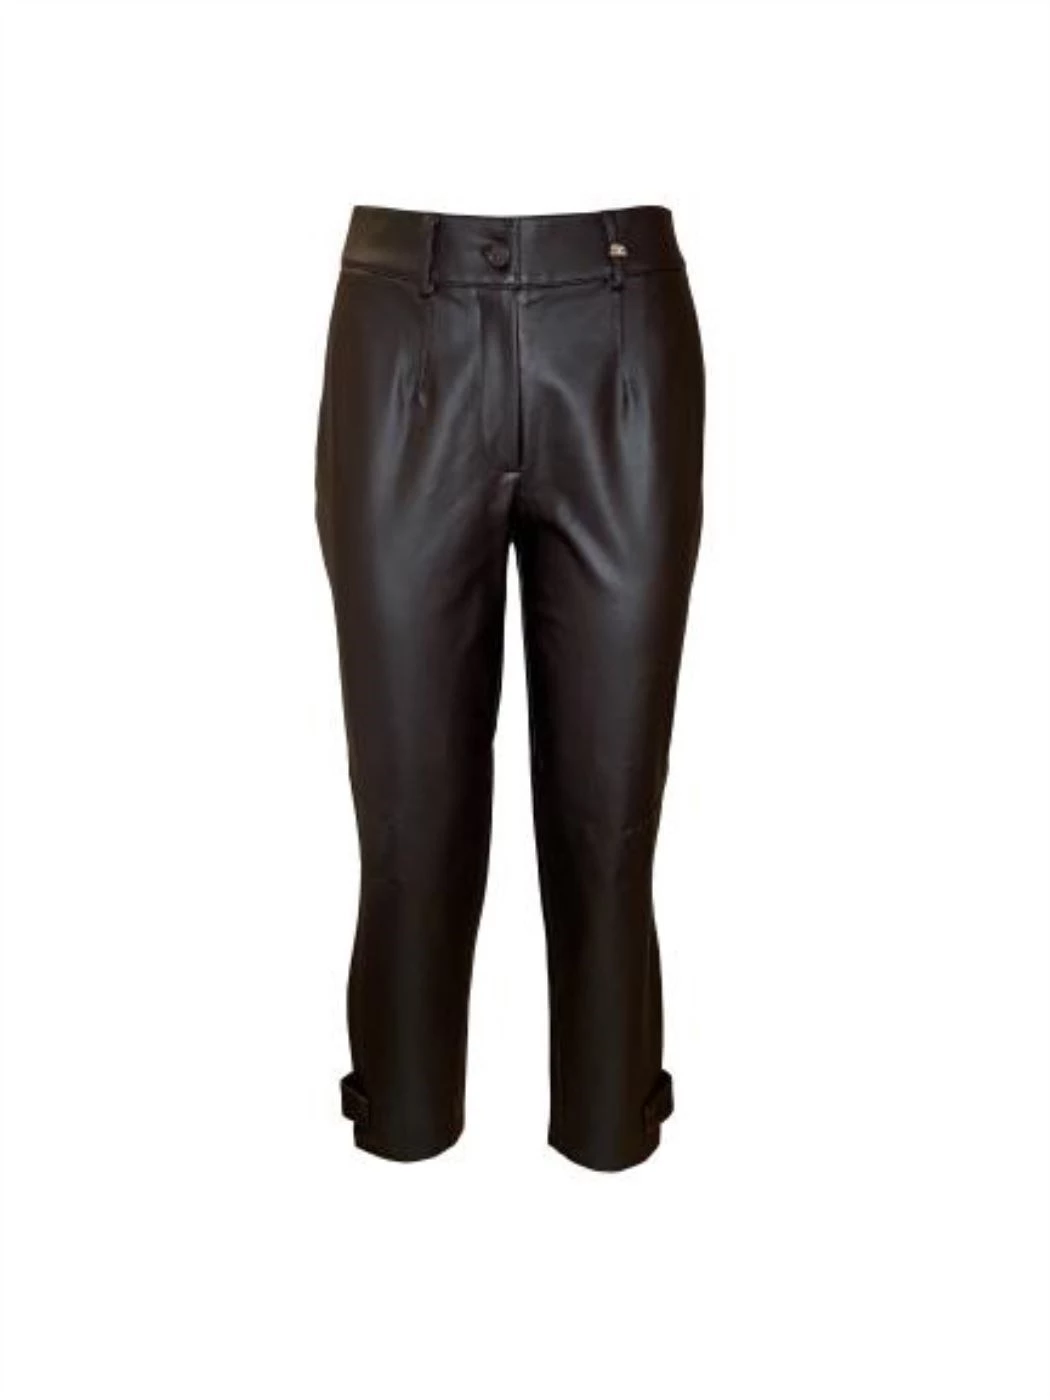 LuckyLu eco-leather jogger trousers